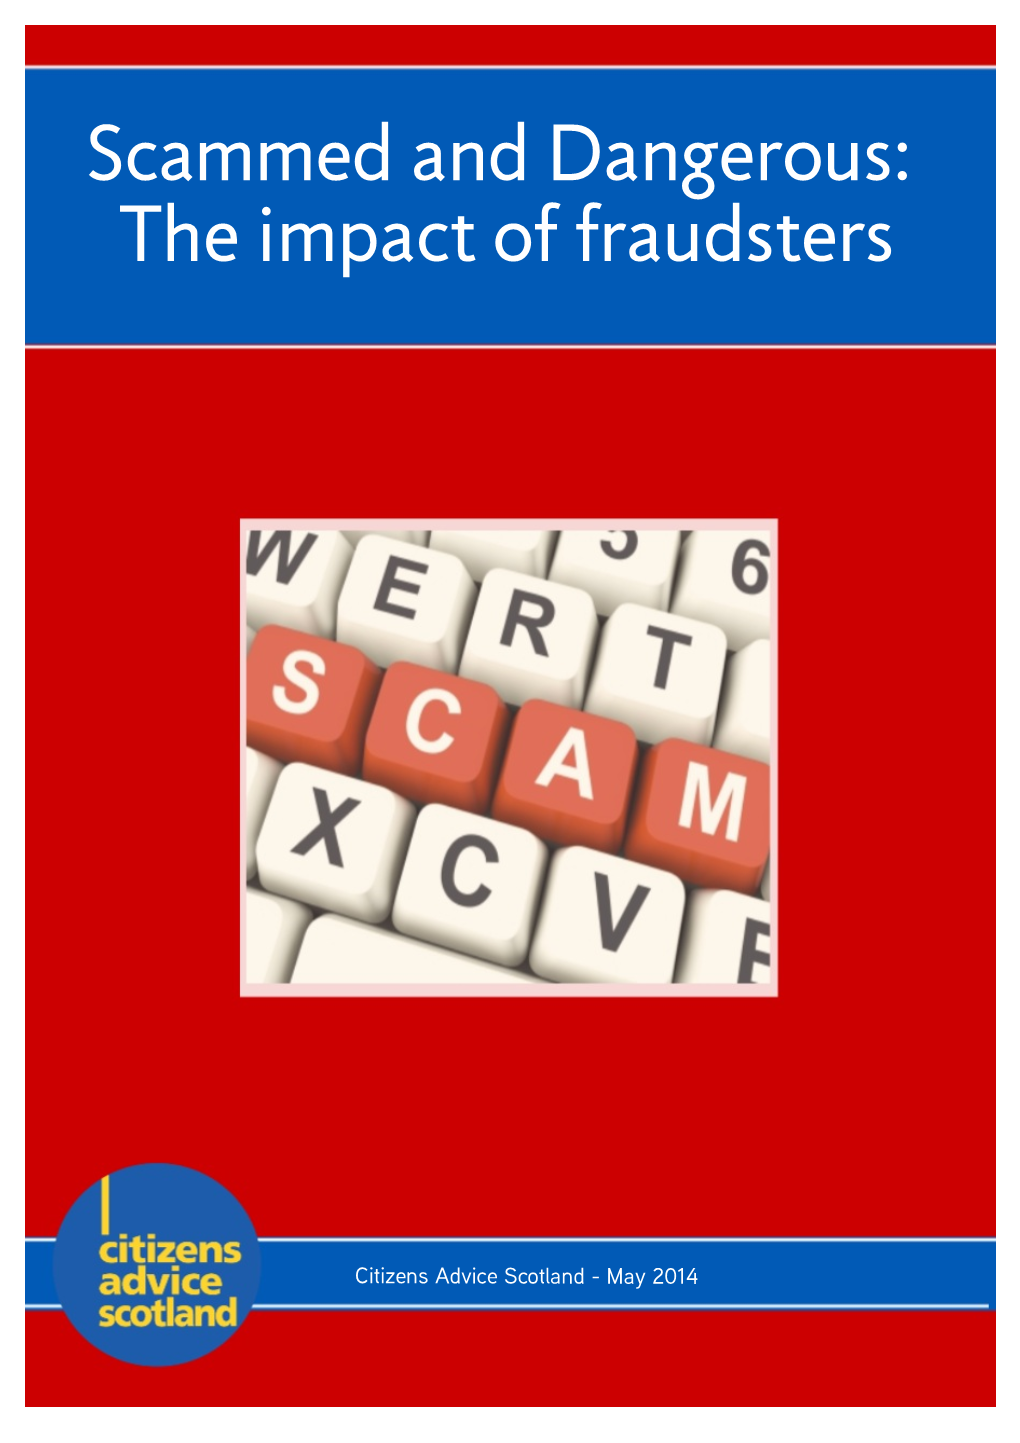 Scammed and Dangerous: the Impact of Fraudsters